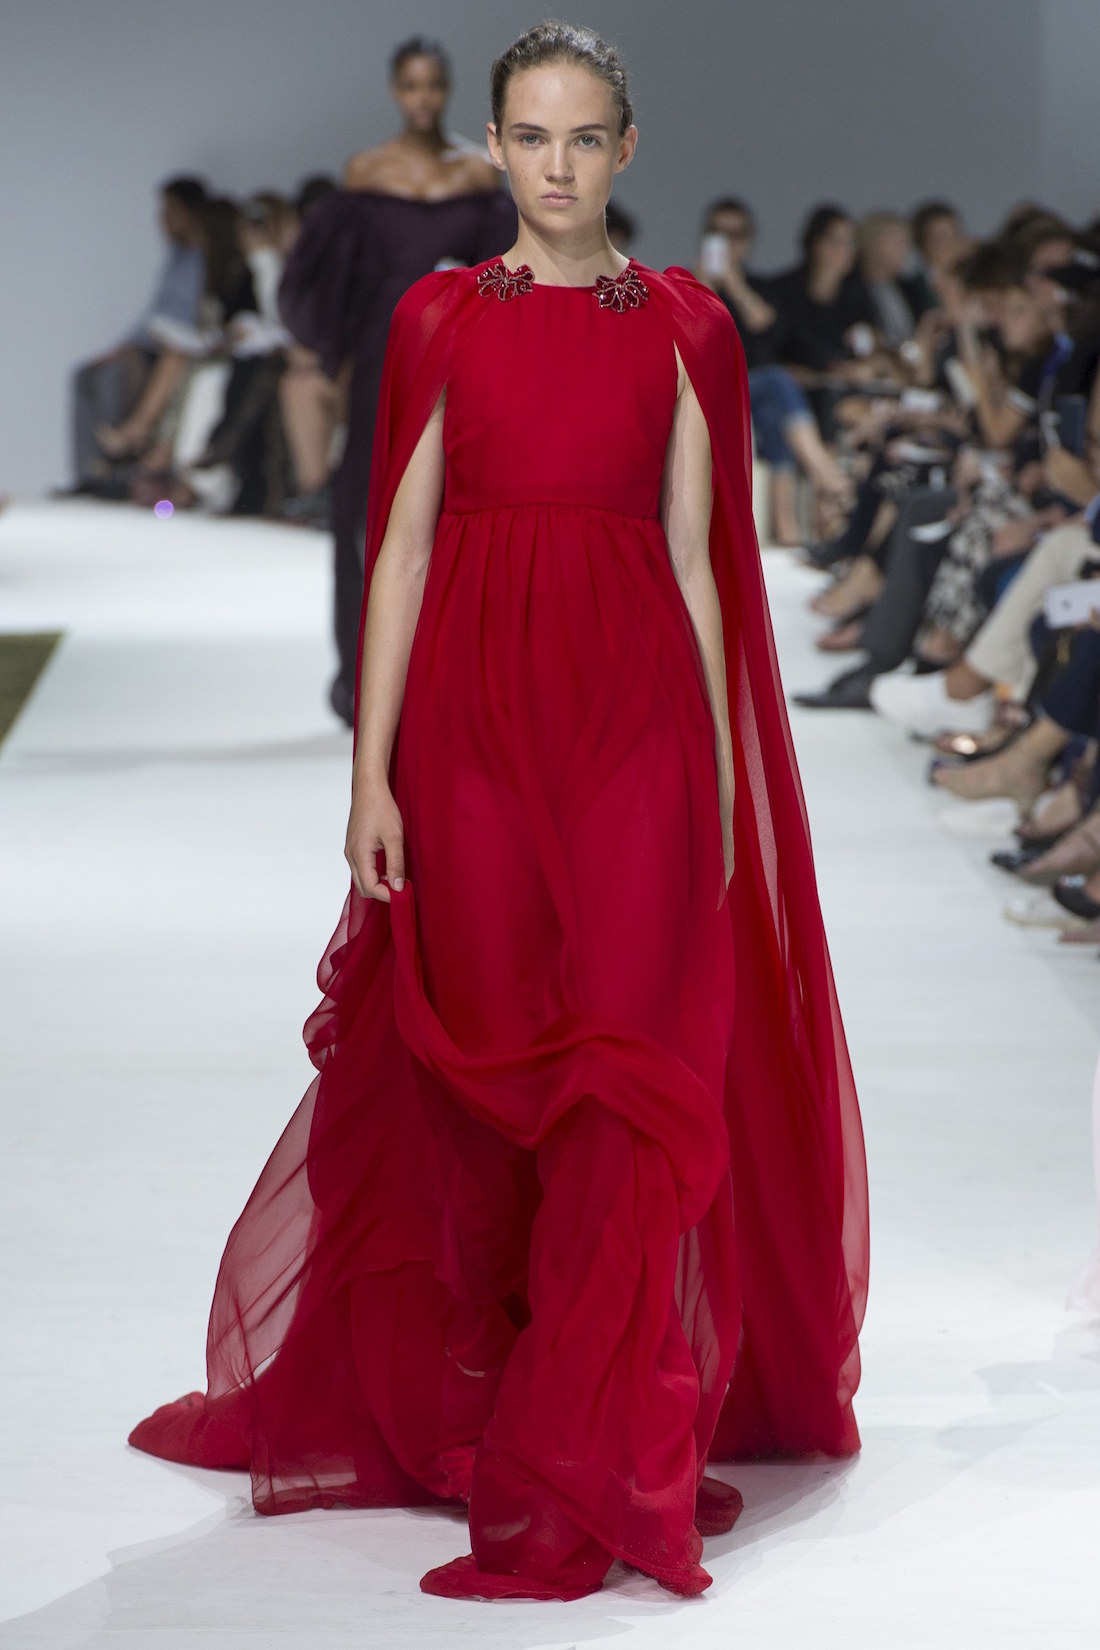 Giambattista Valli Fall 2016 Couture Collection – Project FairyTale